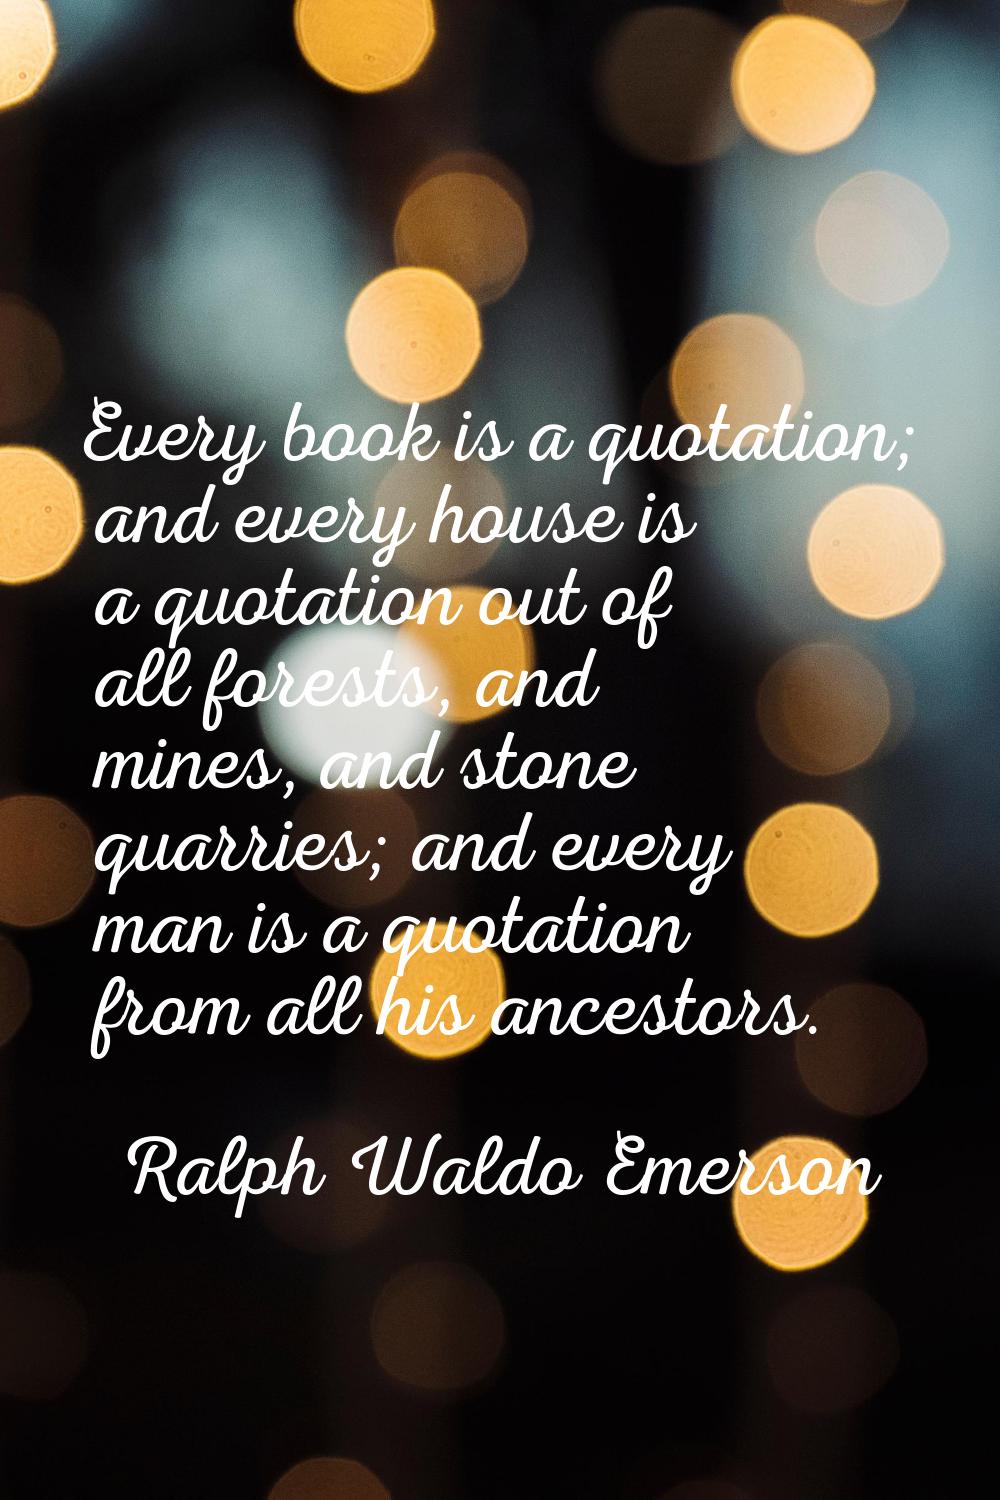 Every book is a quotation; and every house is a quotation out of all forests, and mines, and stone 